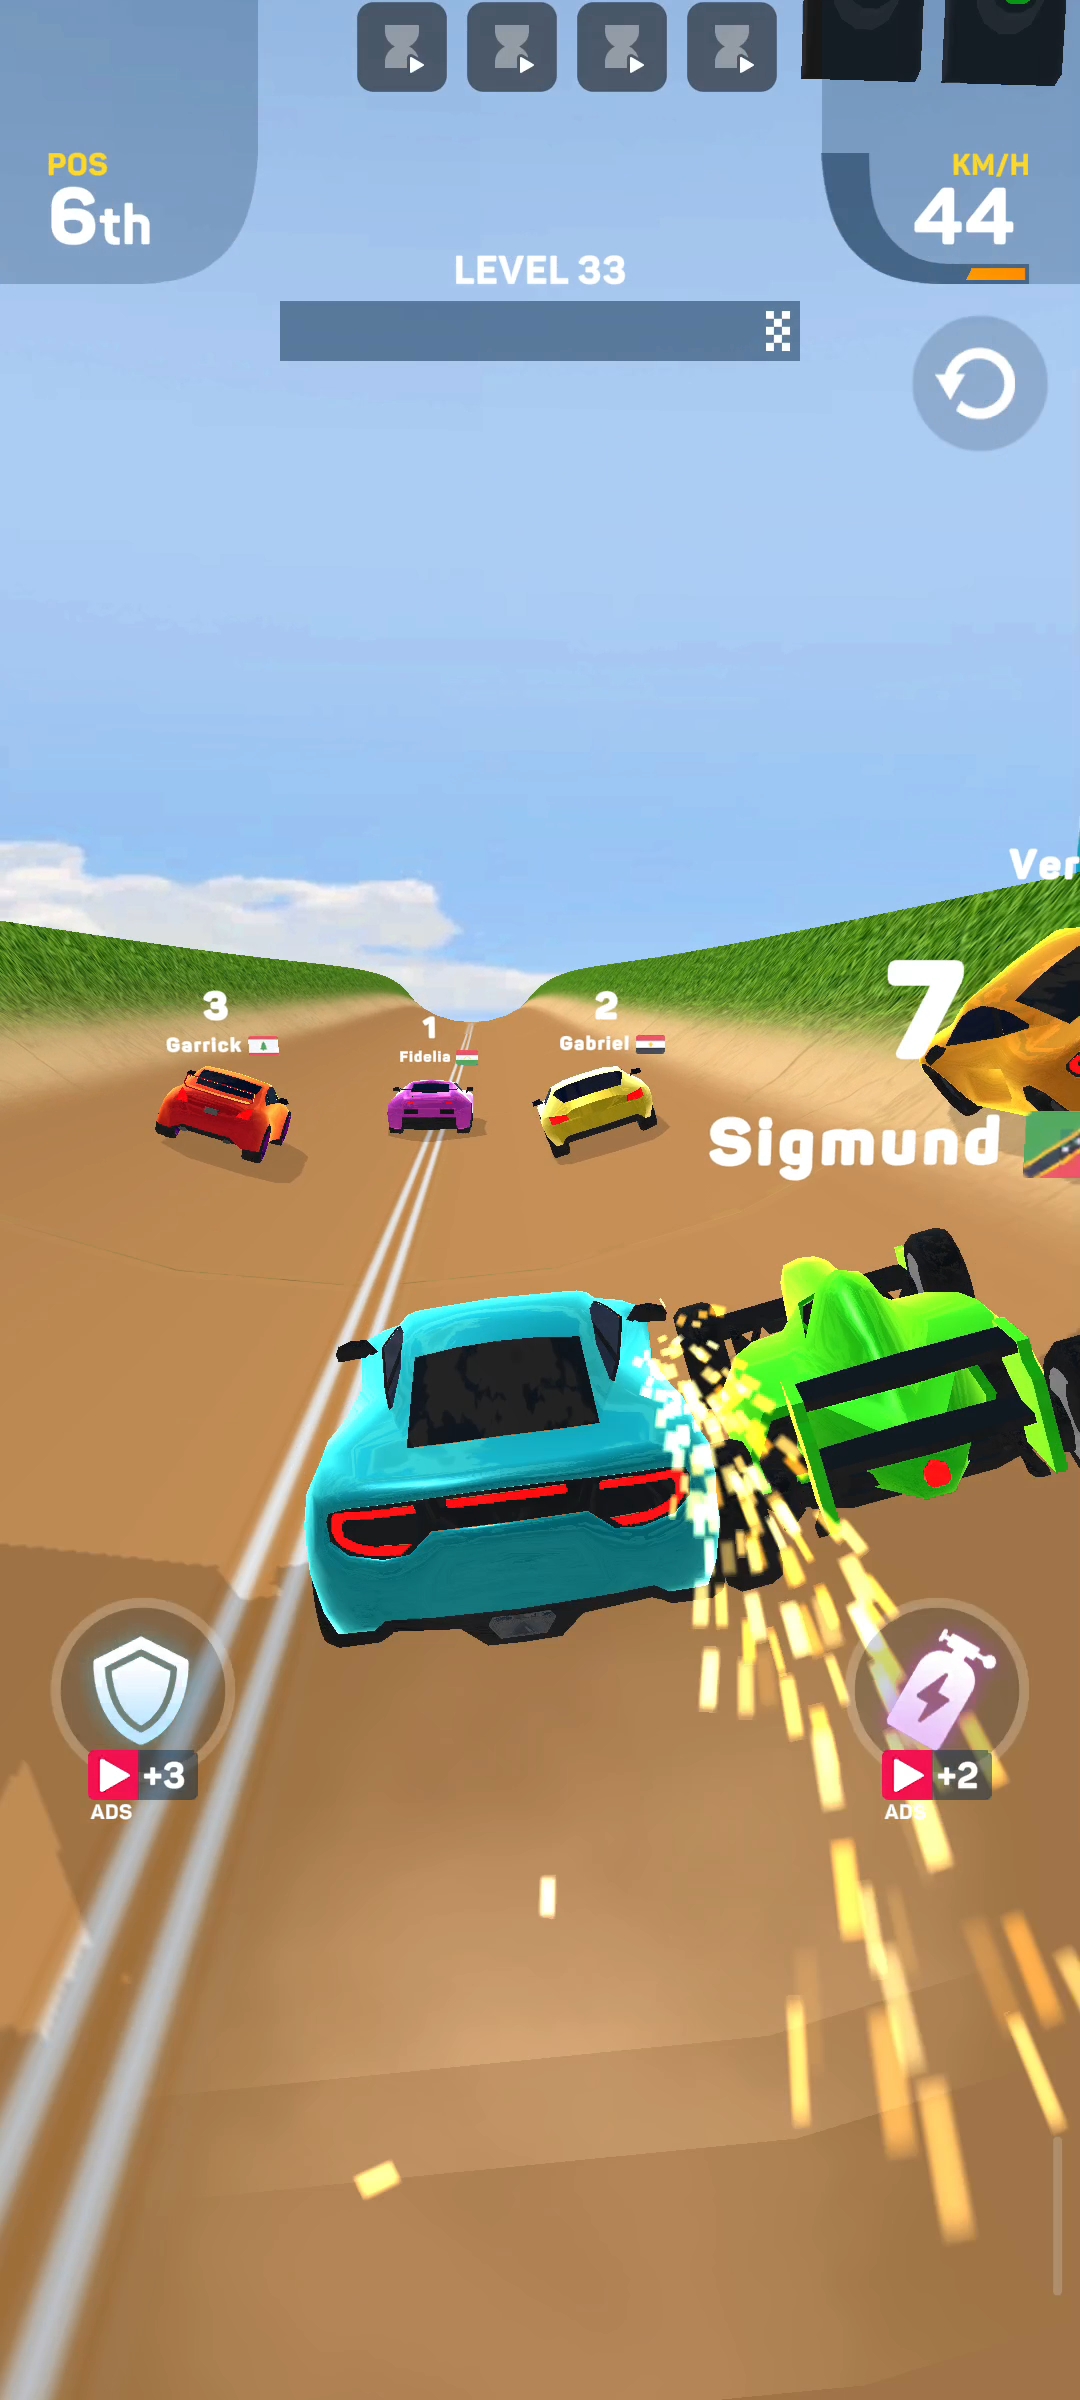 i-play-3rd-day-car-race-master-game-level-33-complete-in-1-13-minutes-blurt